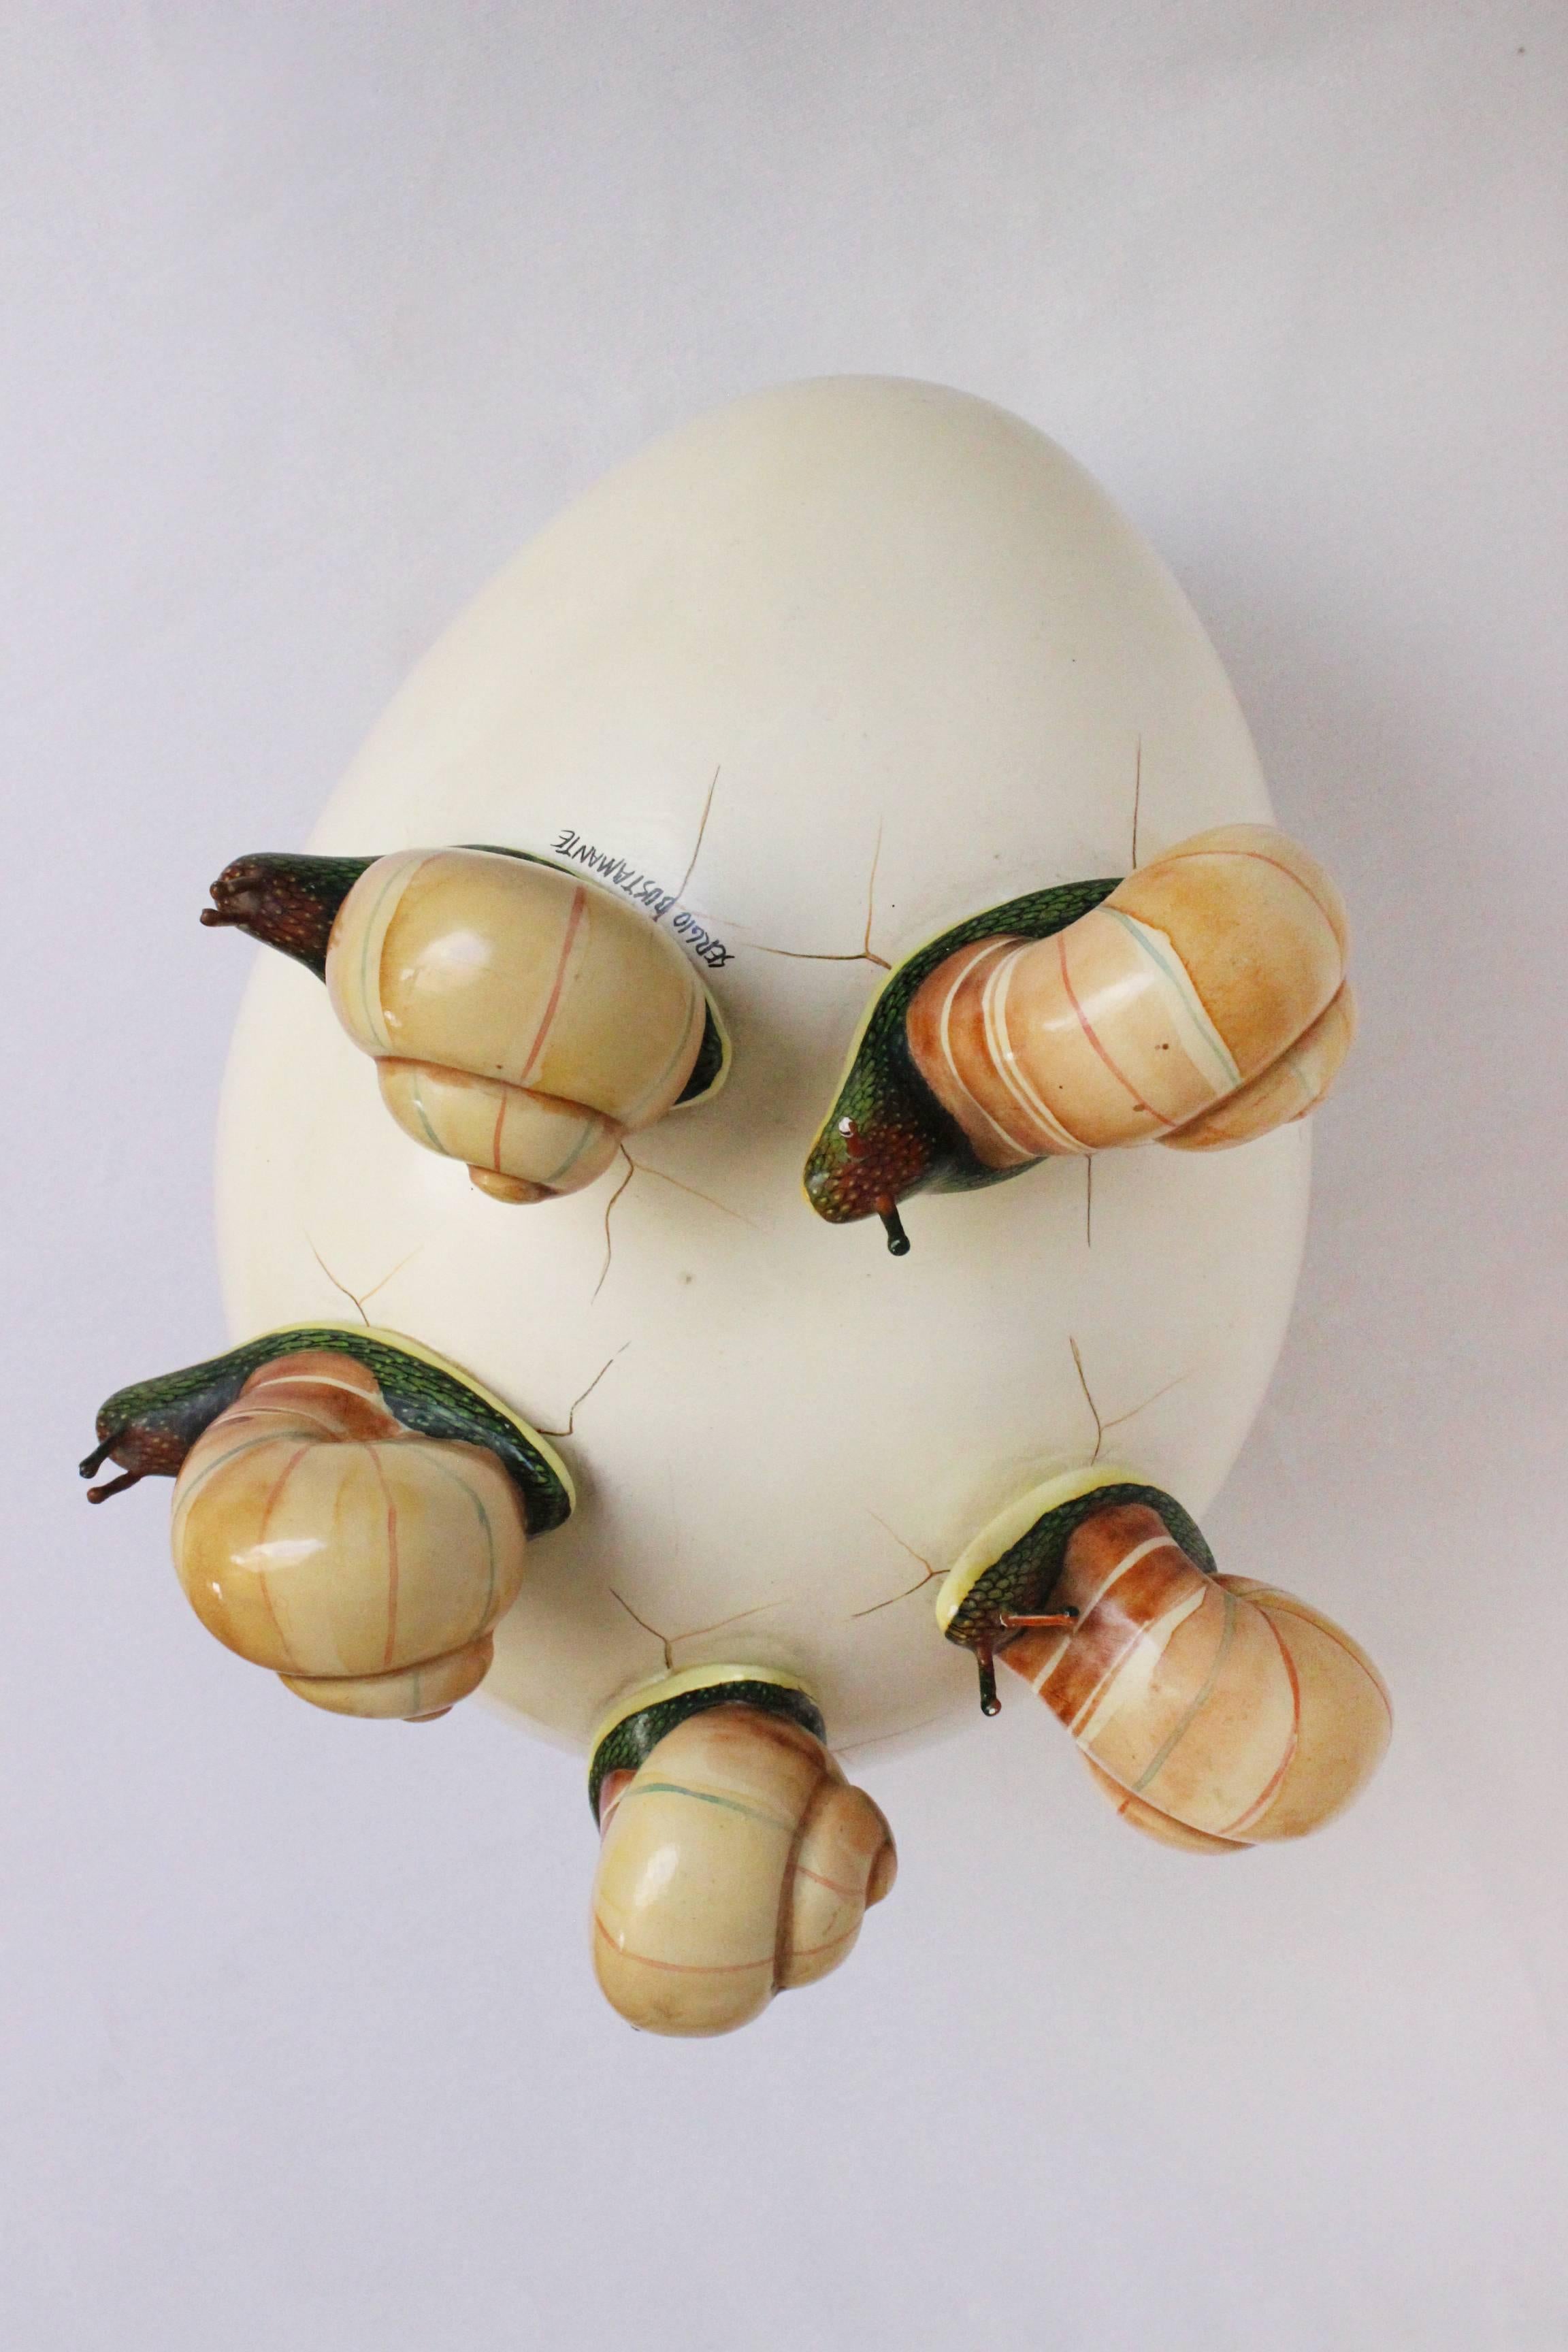 Snail egg Sculpture
Sergio Bustamante
Polychromed Ceramic
22 x 25 x 20 cm
1980, MX
No base

Sergio Bustamante is a Mexican Artist and sculptor. Though born in Culiacan, Sinaloa, Mexico, Sergio Bustamante has lived in the Guadalajara area since early